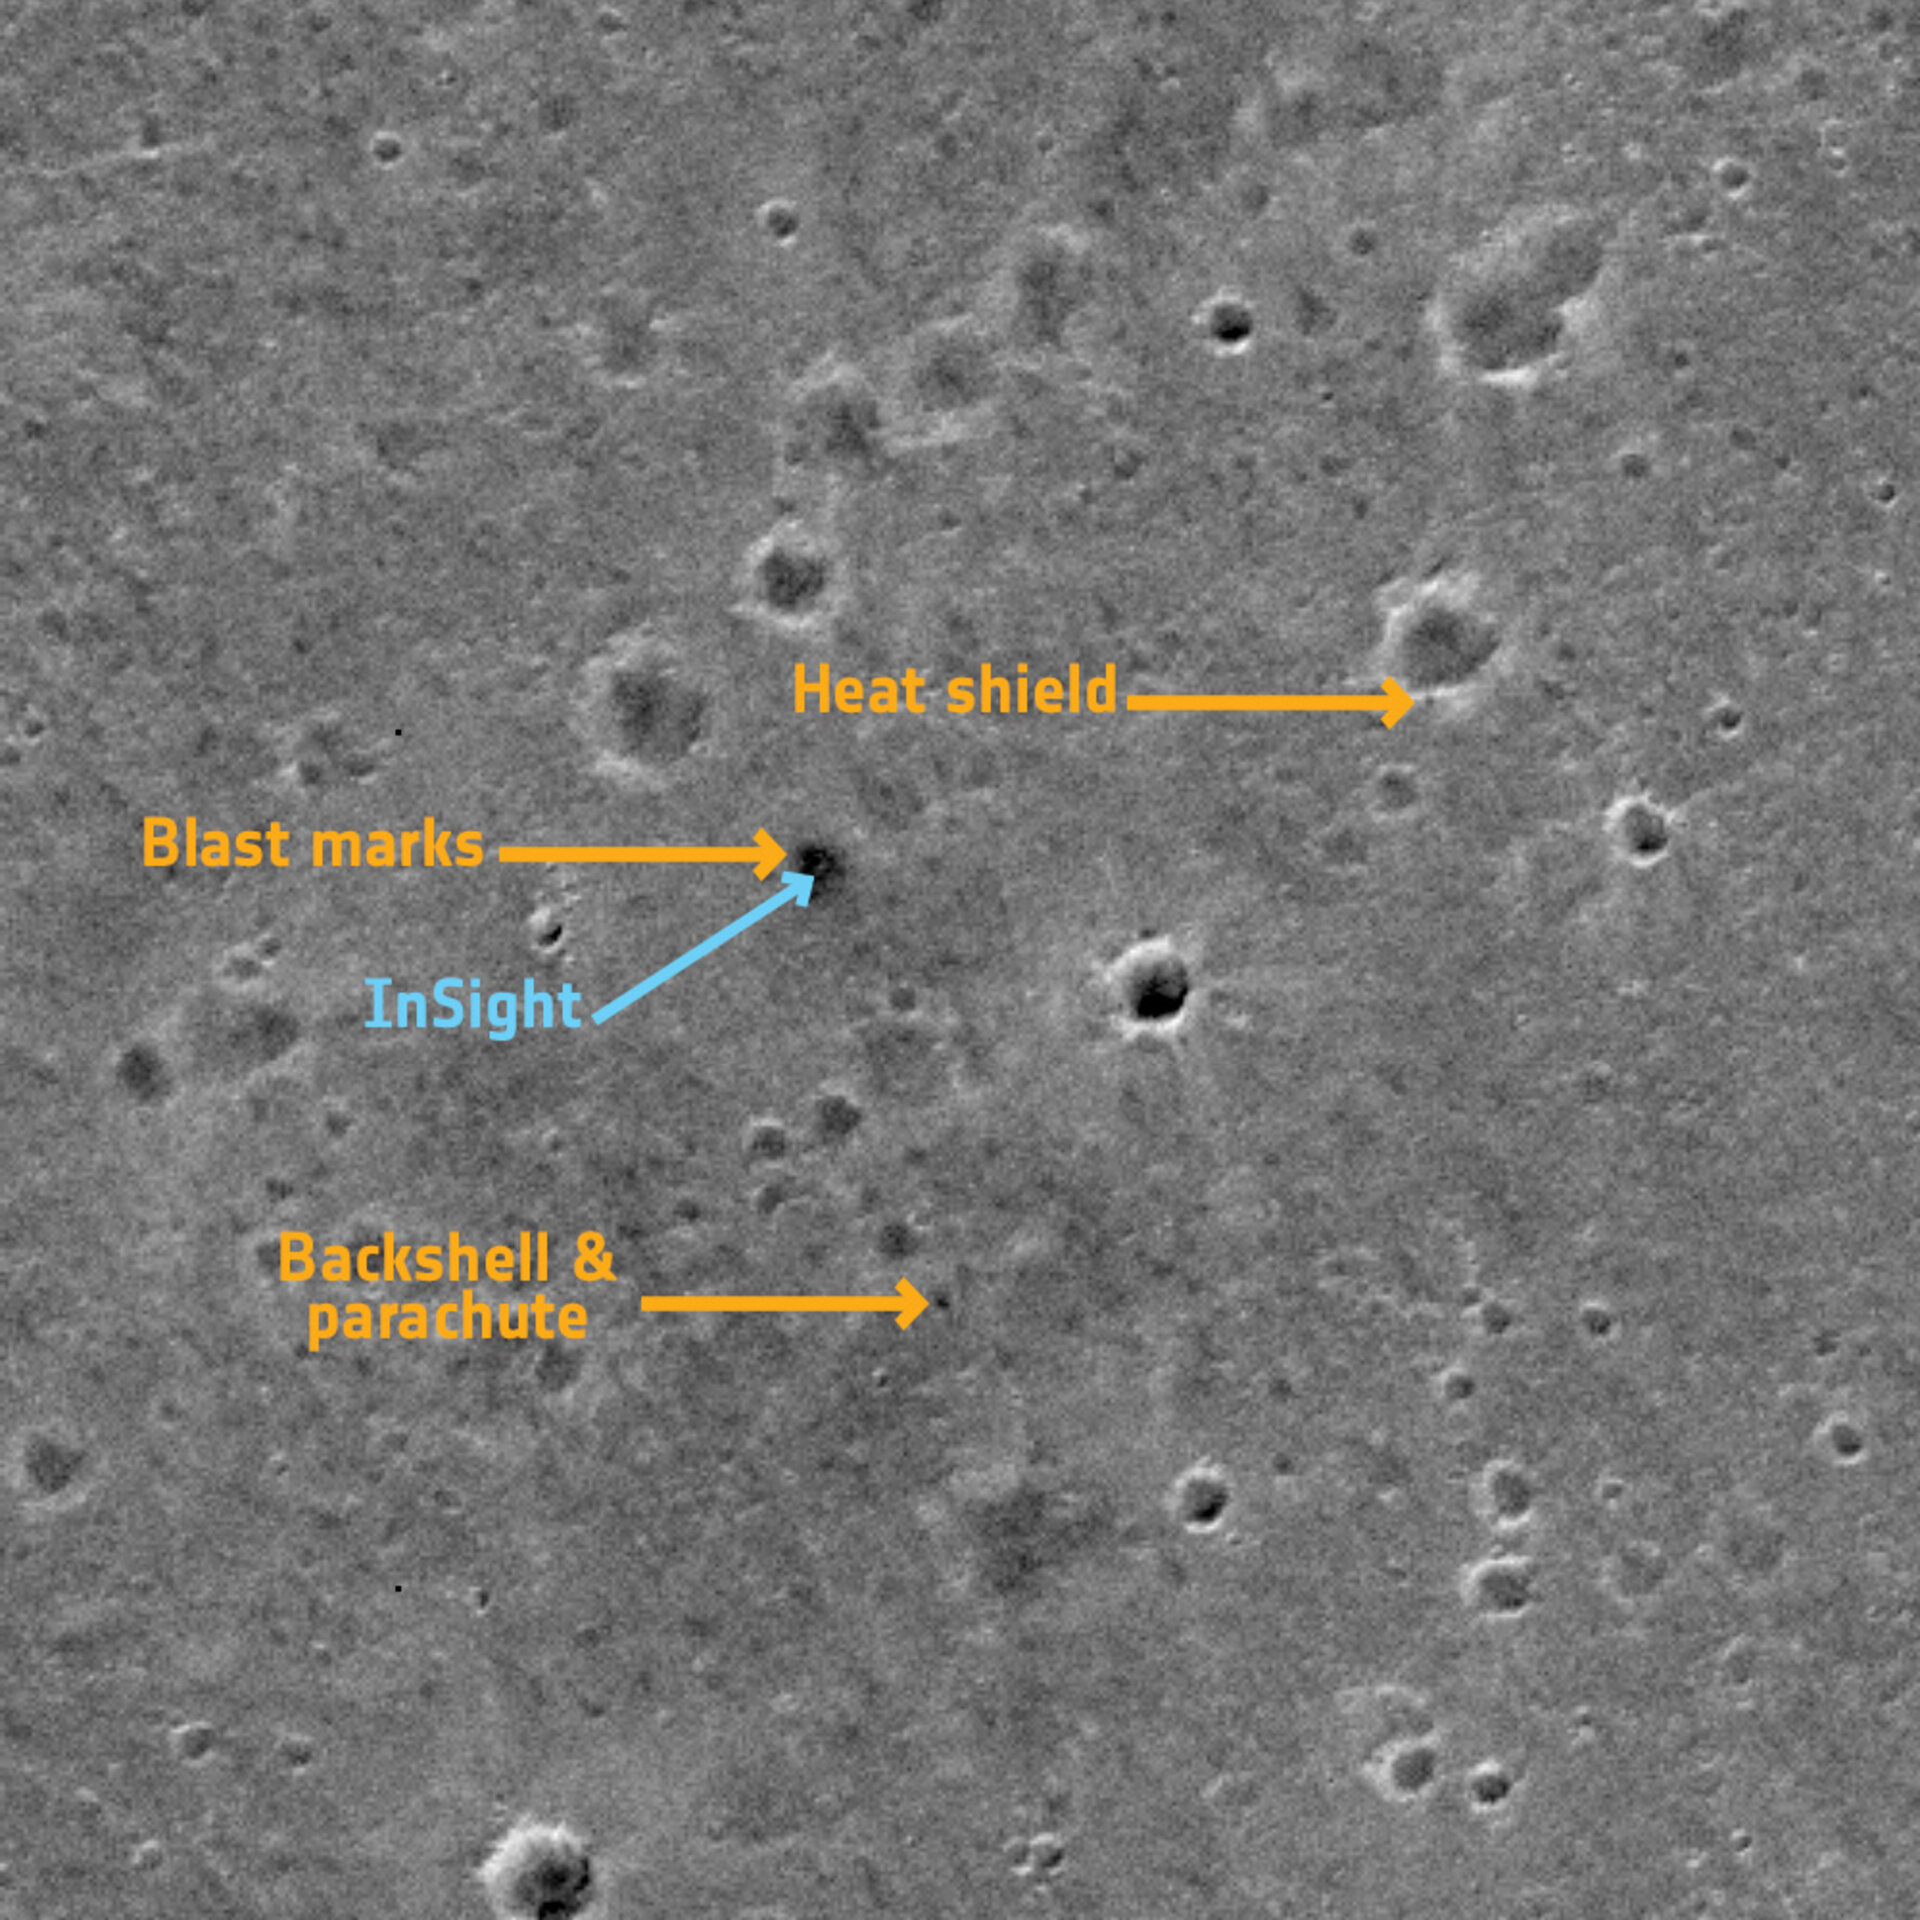 Figure 75: ExoMars images InSight. The image shows a panchromatic channel image of the InSight landing site on Mars, acquired by the CaSSIS instrument onboard the ESA-Roscosmos ExoMars TGO on 2 March 2019. The image shows an area of about 2.25 km x 2.25 km in the Elysium Planitia region. The positions of the InSight lander itself, the blast marks from the retro rockets used during landing, the heatshield and the backshell of the entry descent and landing system are marked. It is the first time a European instrument has identified a lander and related equipment on the Red Planet. The original image had a scale of about 4.5 m per pixel, and has been expanded to 2.25 m/pixel for display purposes (image credit: ESA/Roscosmos/CaSSIS, CC BY-SA 3.0 IGO)